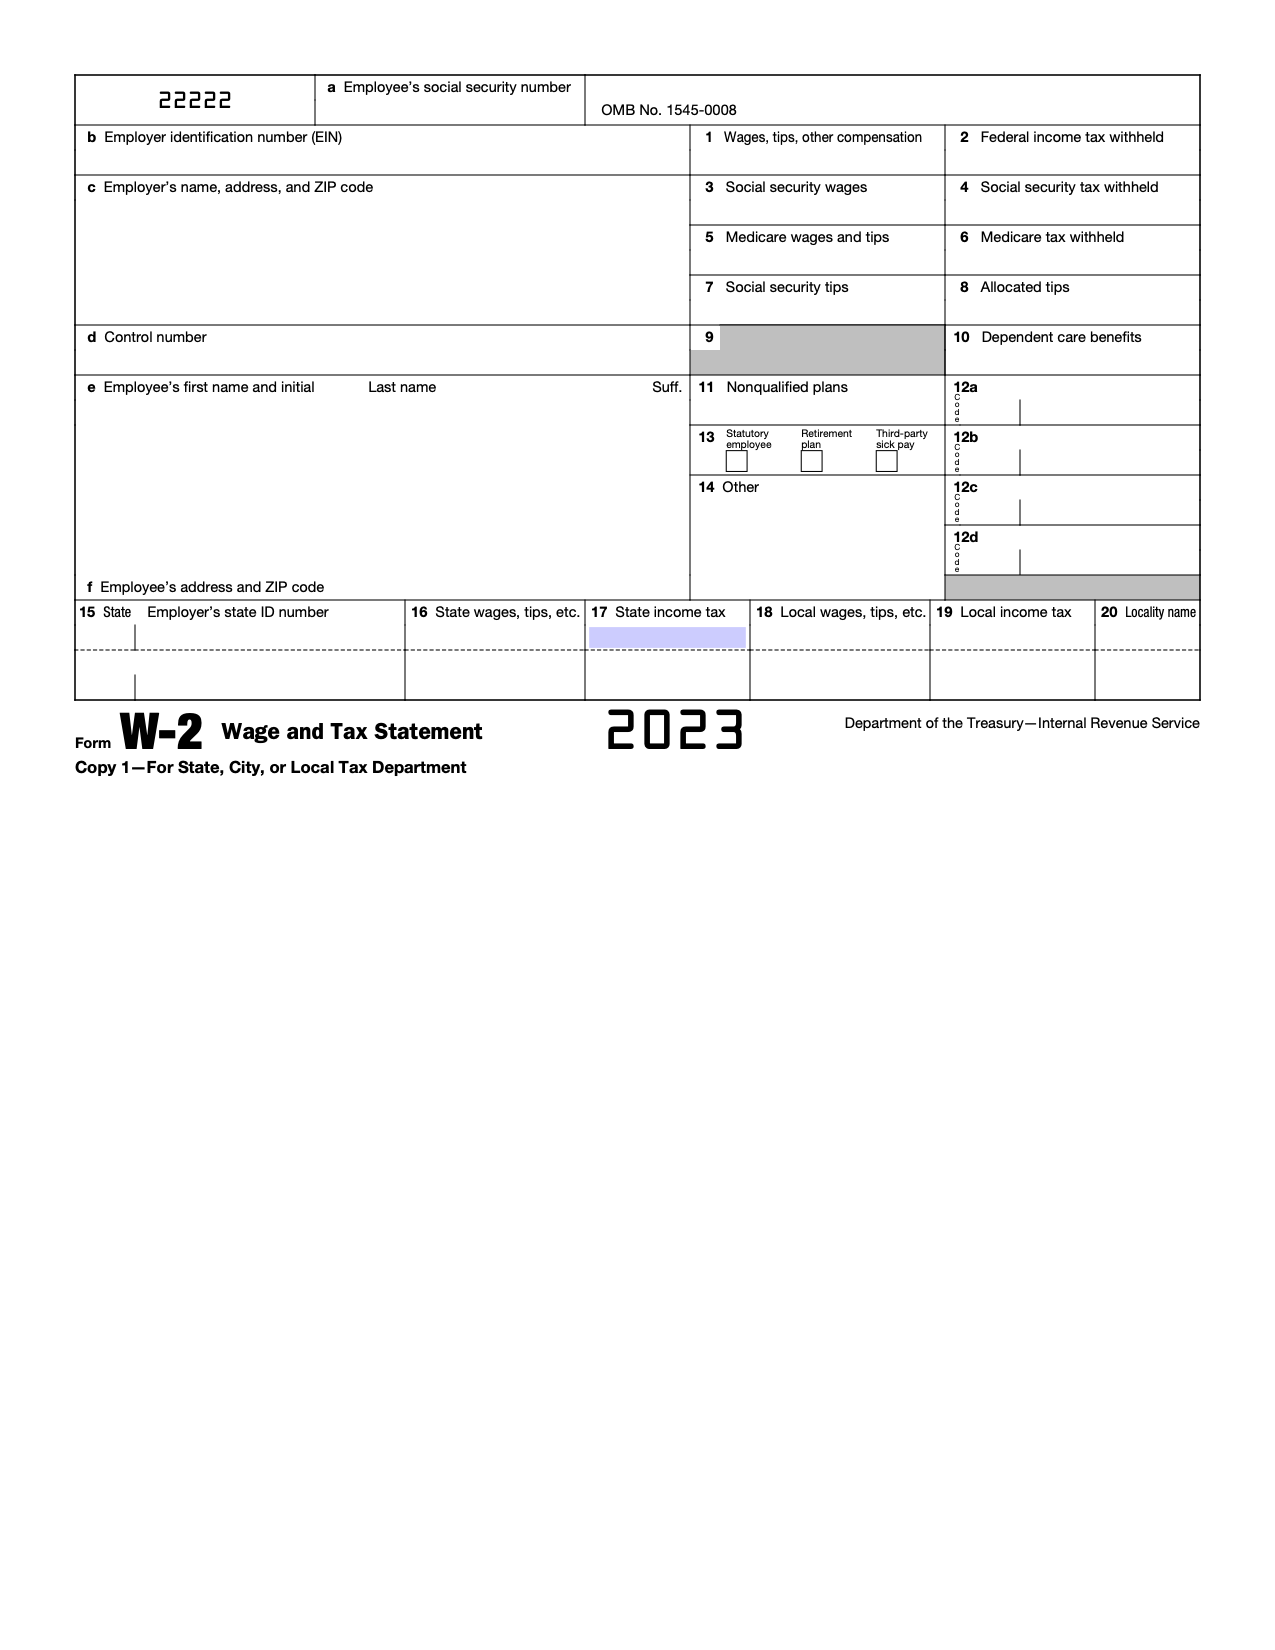 Free Irs Form W-2 | Wage And Tax Statement - Pdf – Eforms for Blank W2 Form 2023